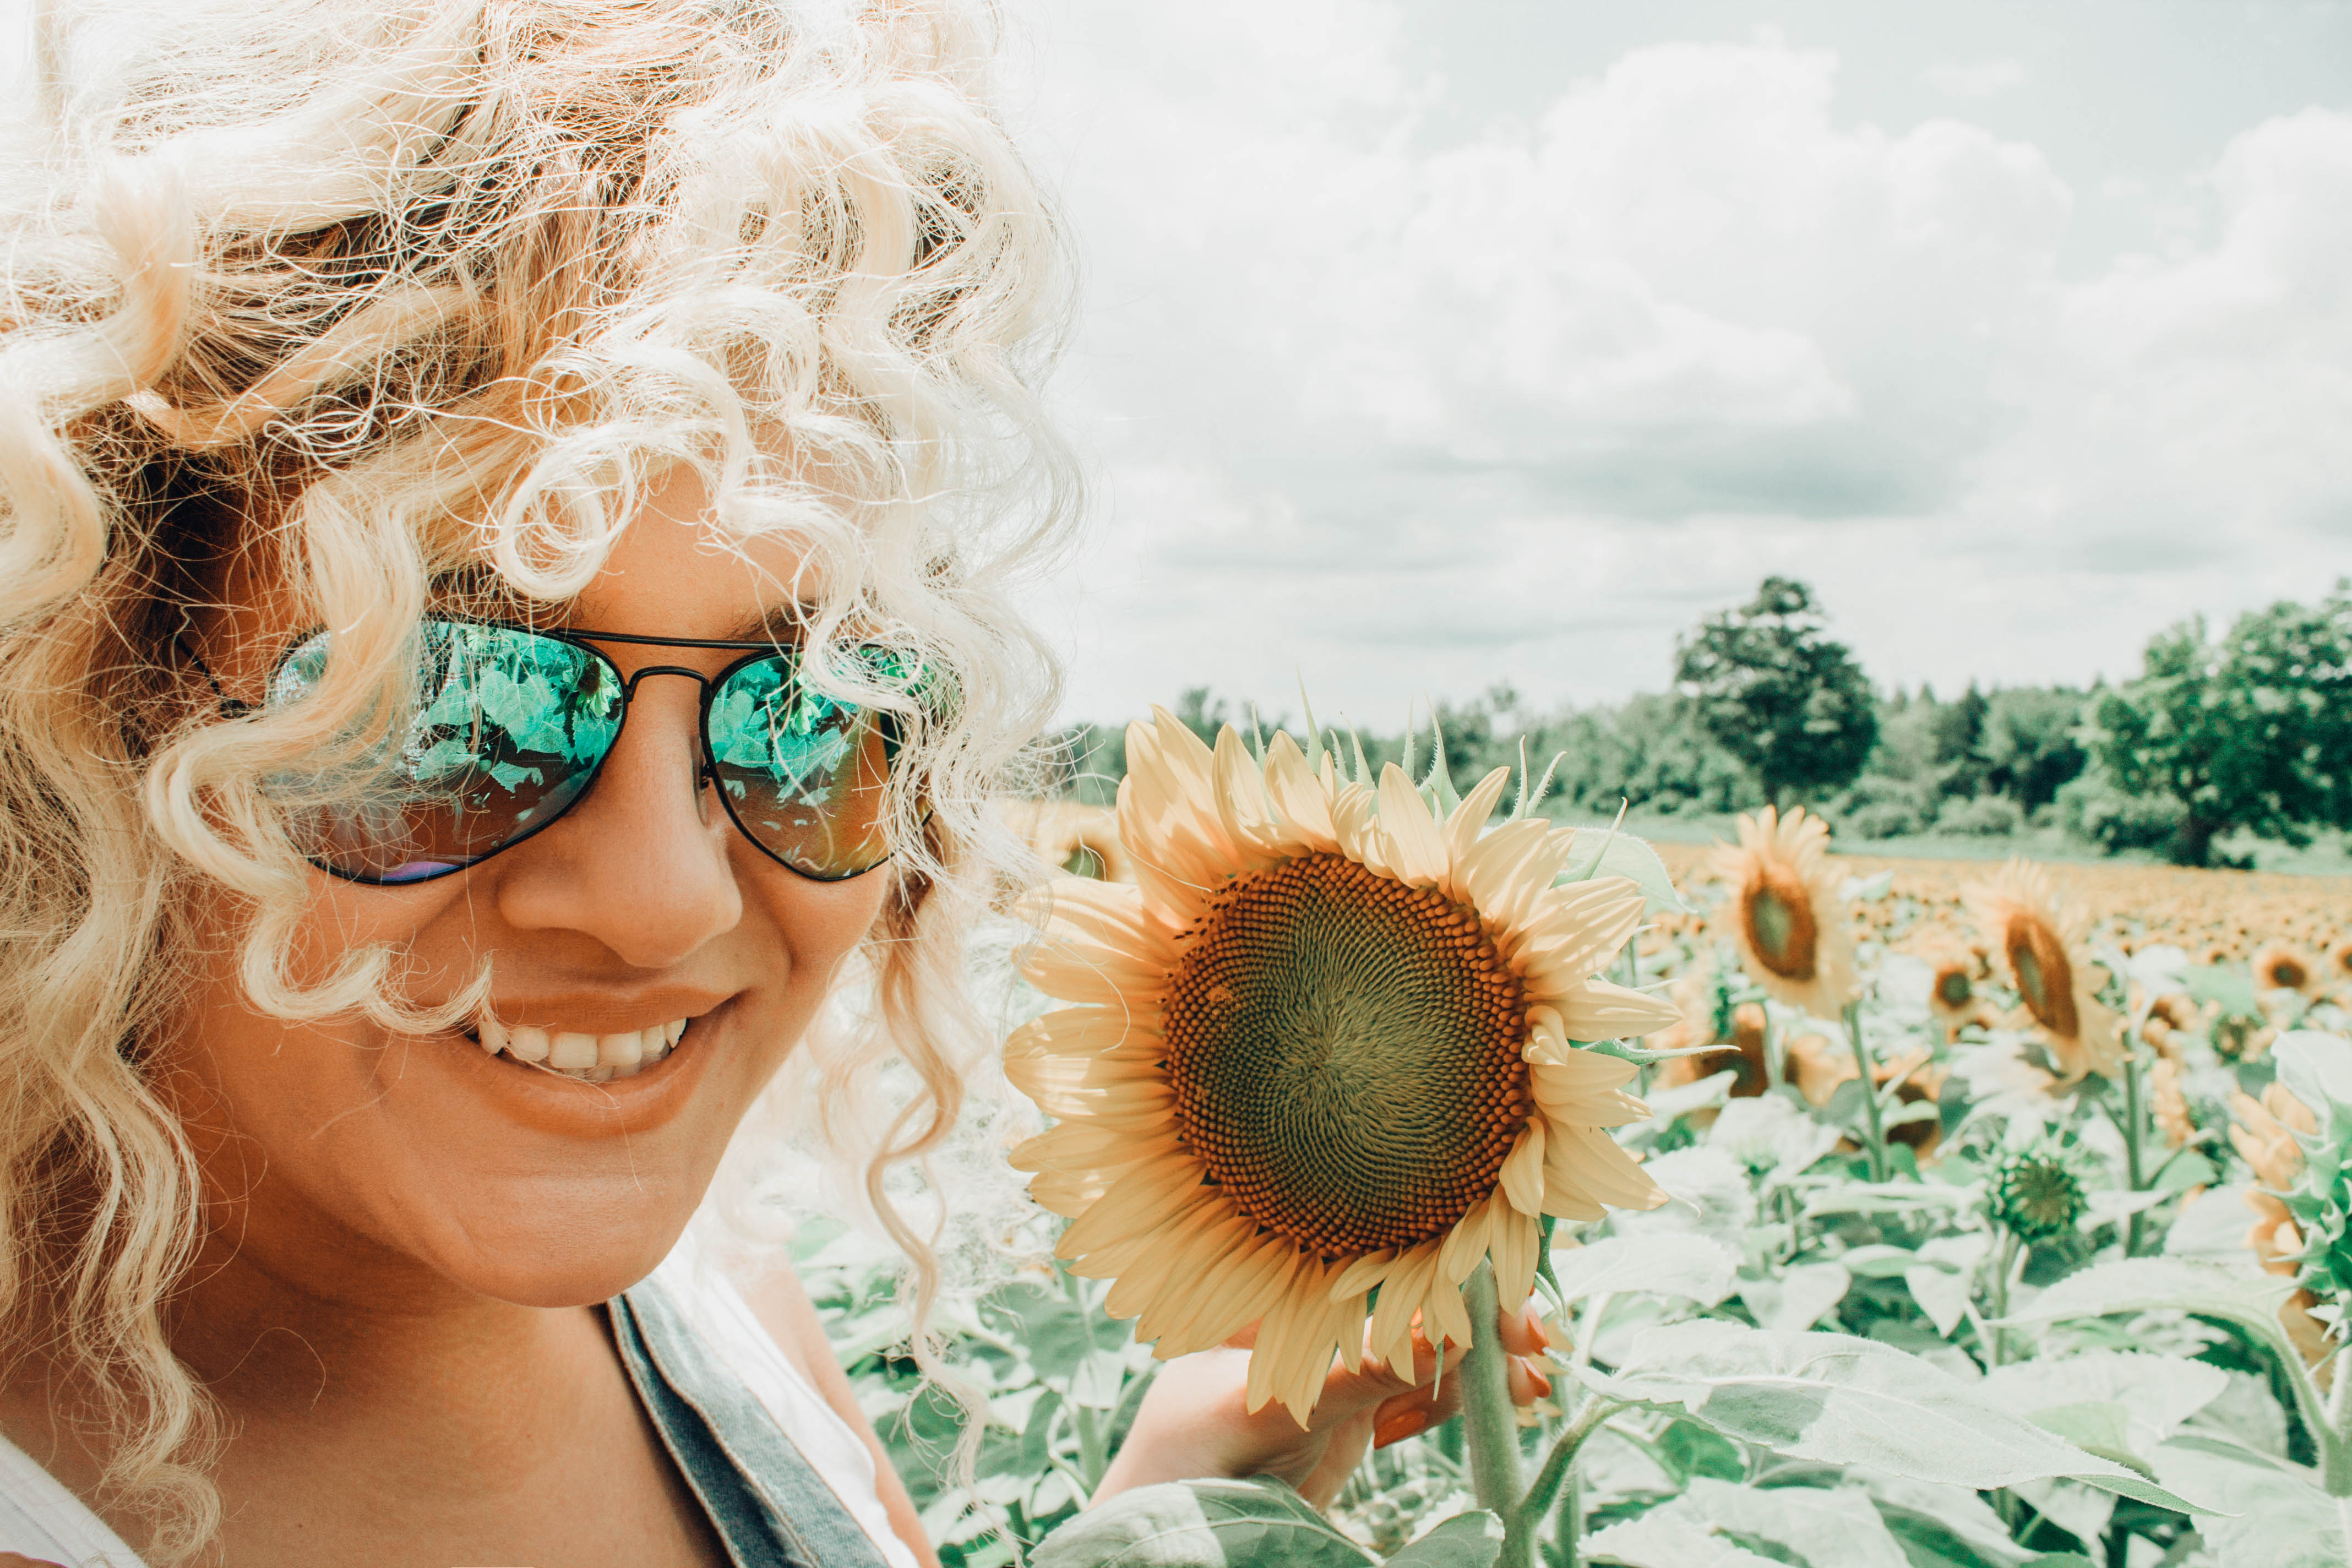 Canva - Smiling Woman Holding Sunflower